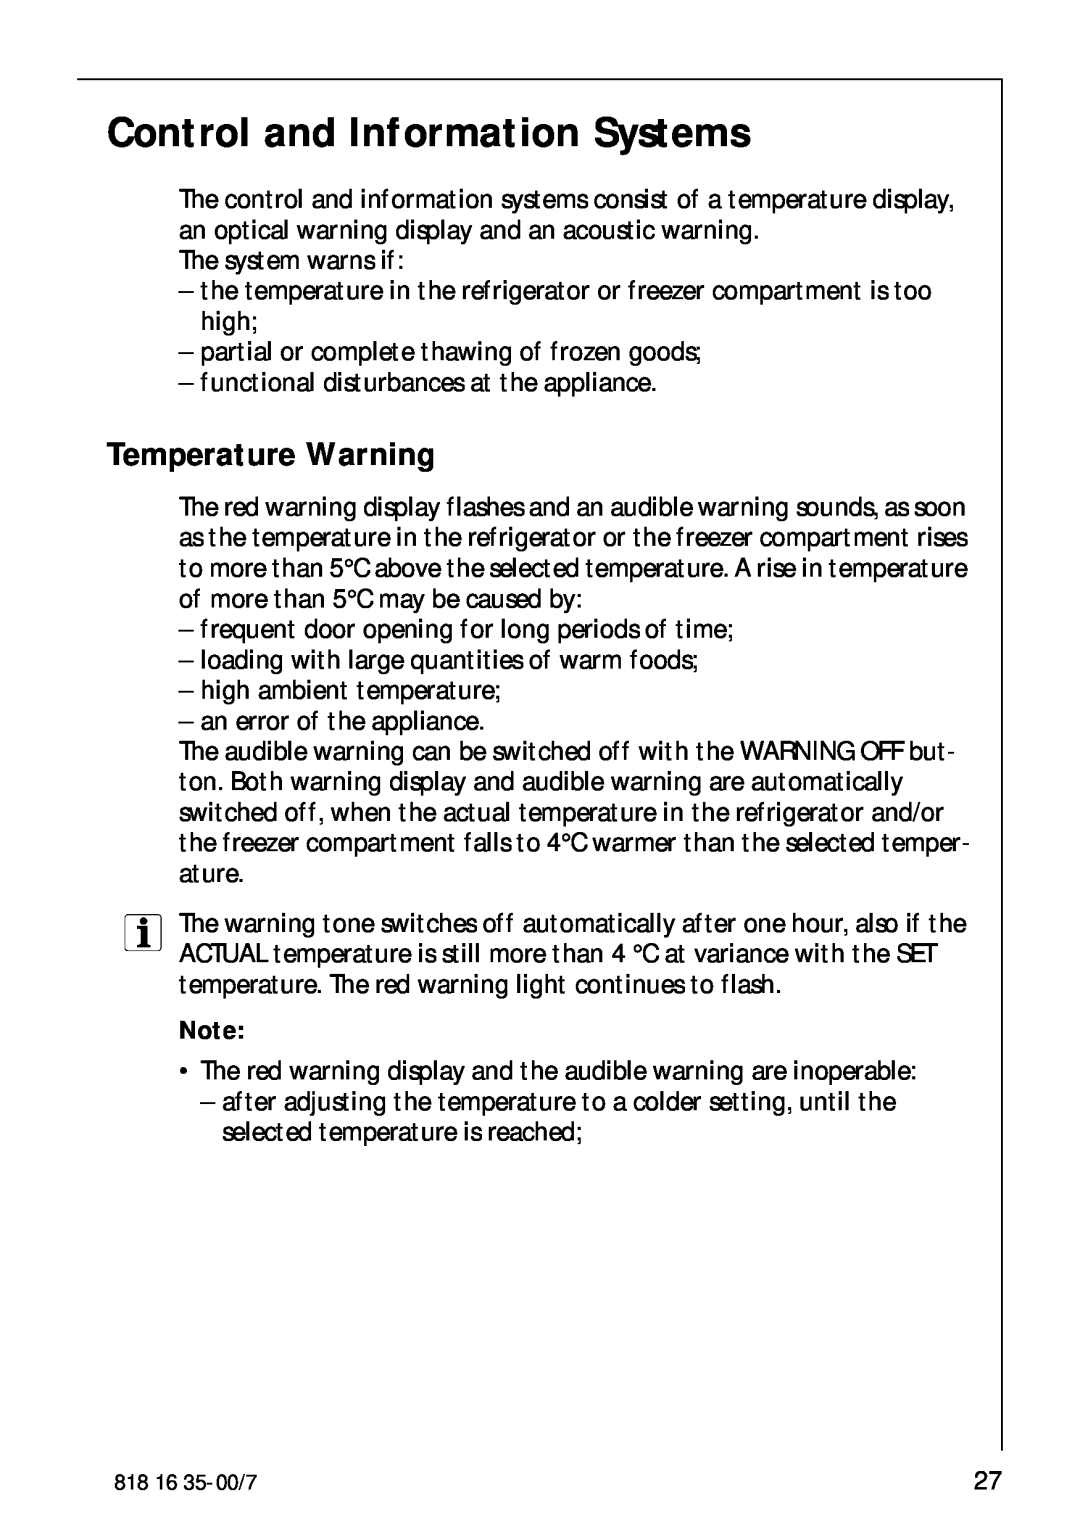 Electrolux KO_SANTO 4085 operating instructions Control and Information Systems, Temperature Warning 